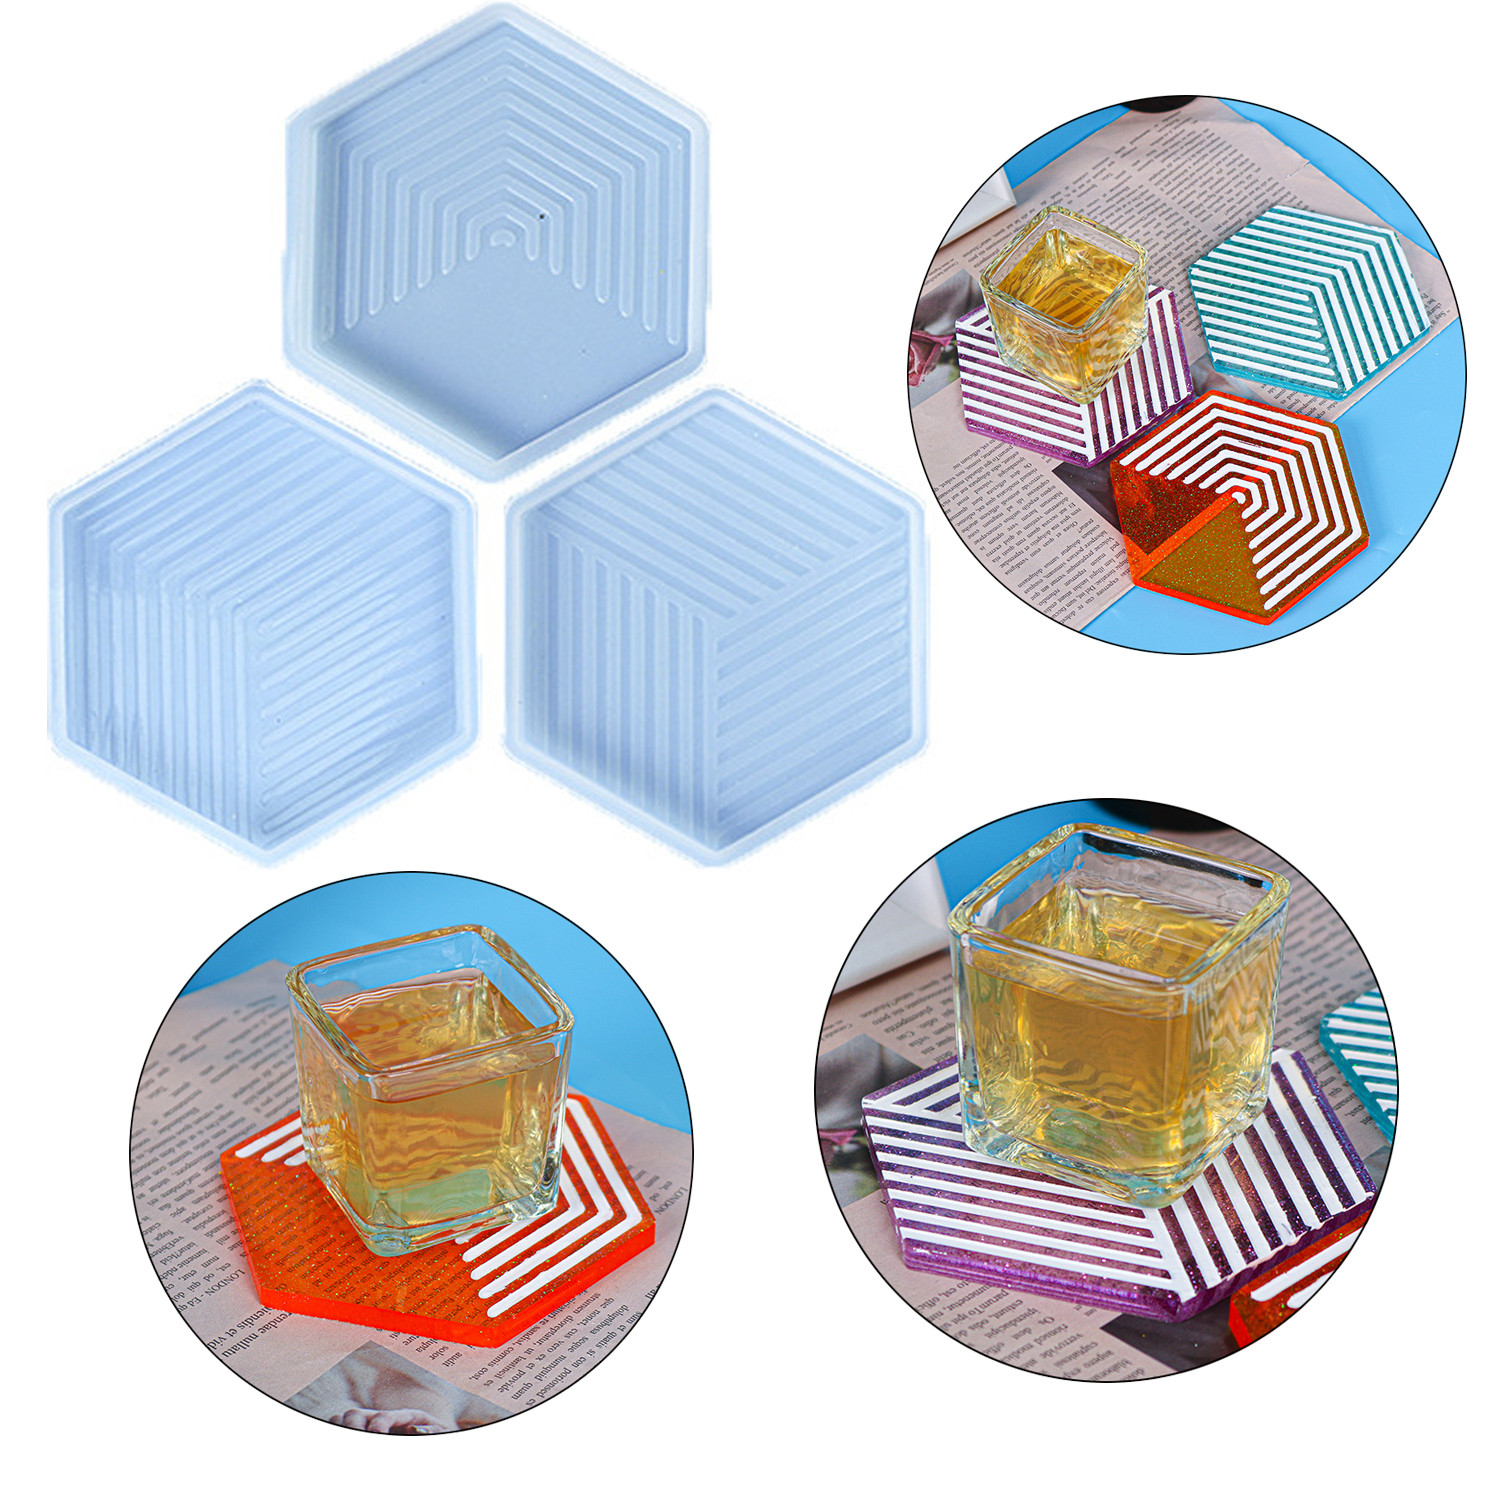 HONEYDEWD Handmade Resin Moulds Casting Silicone Tray Mould Geometric Stripe Tea Tray Coasters